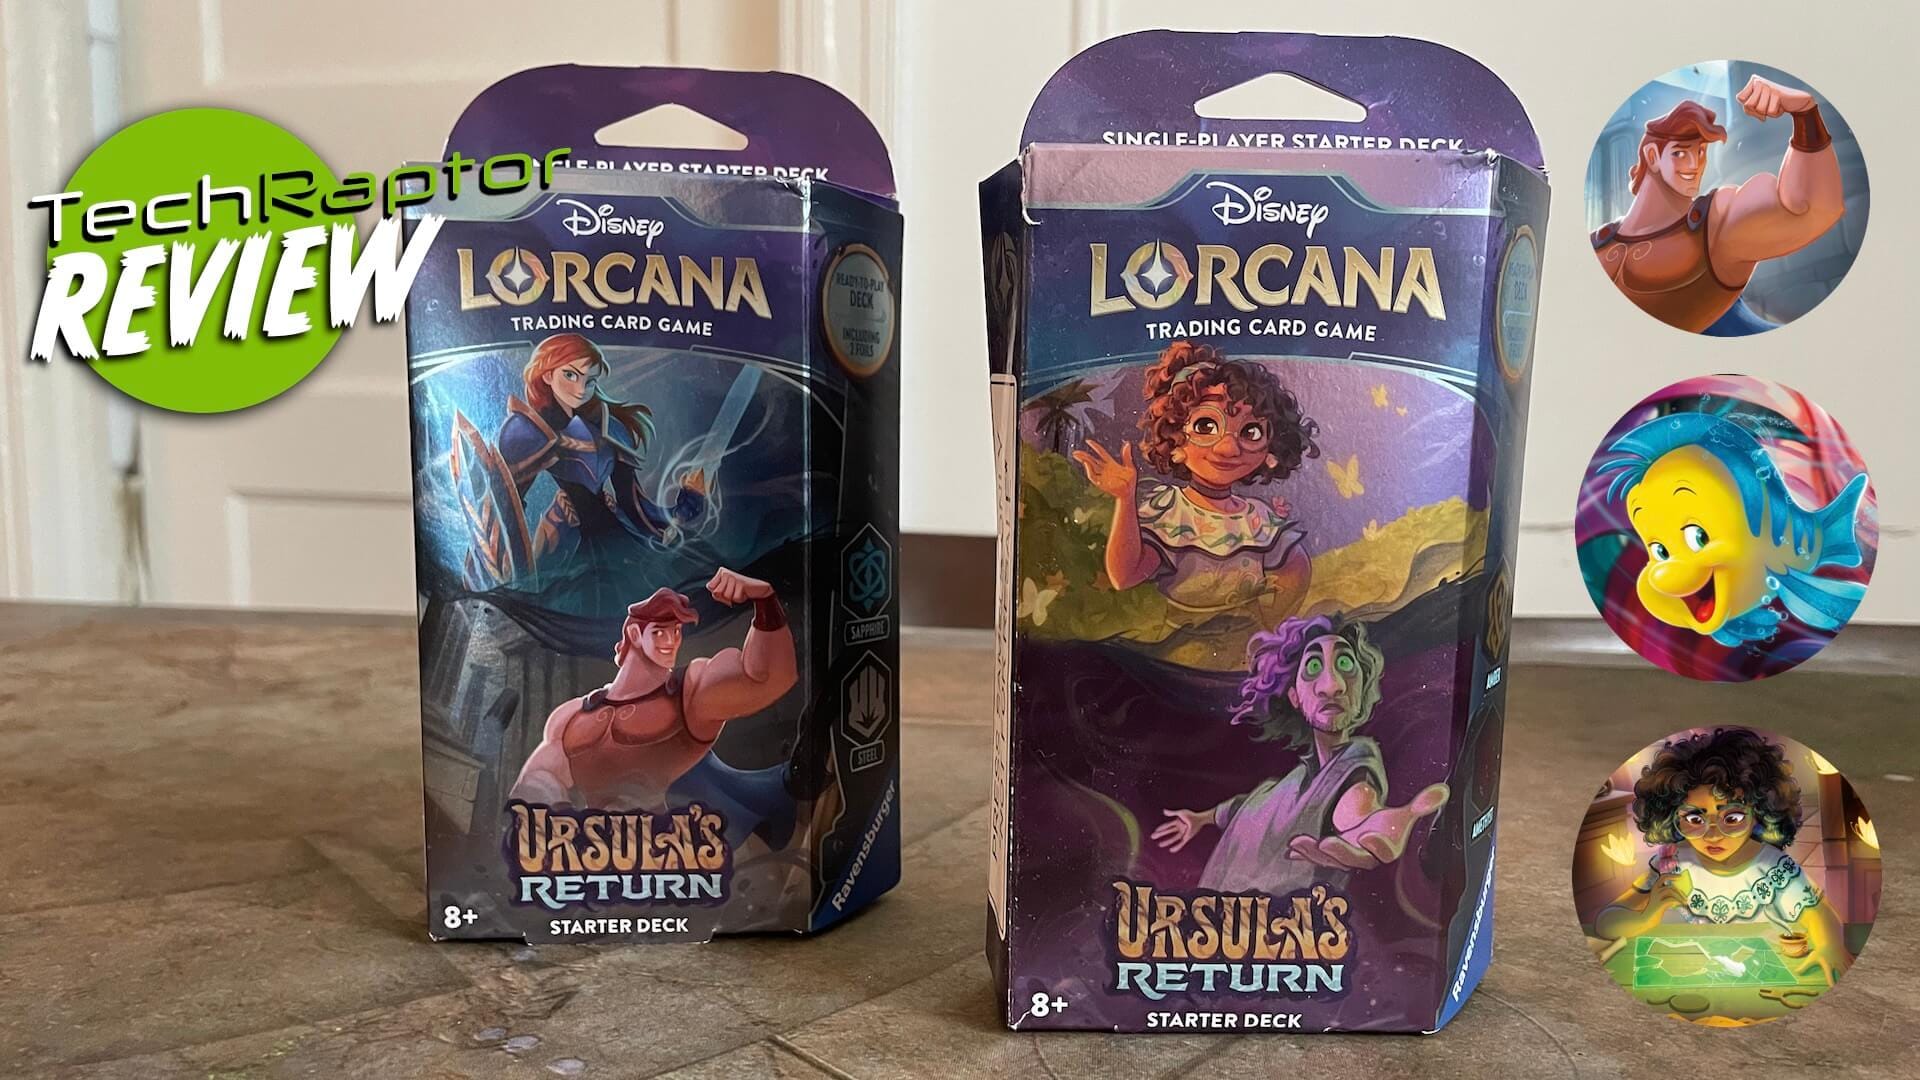 An image of two Lorcana Ursula's Return Starter Decks along with circular images of Hercules, Flounder, and Bruno Madrigal.